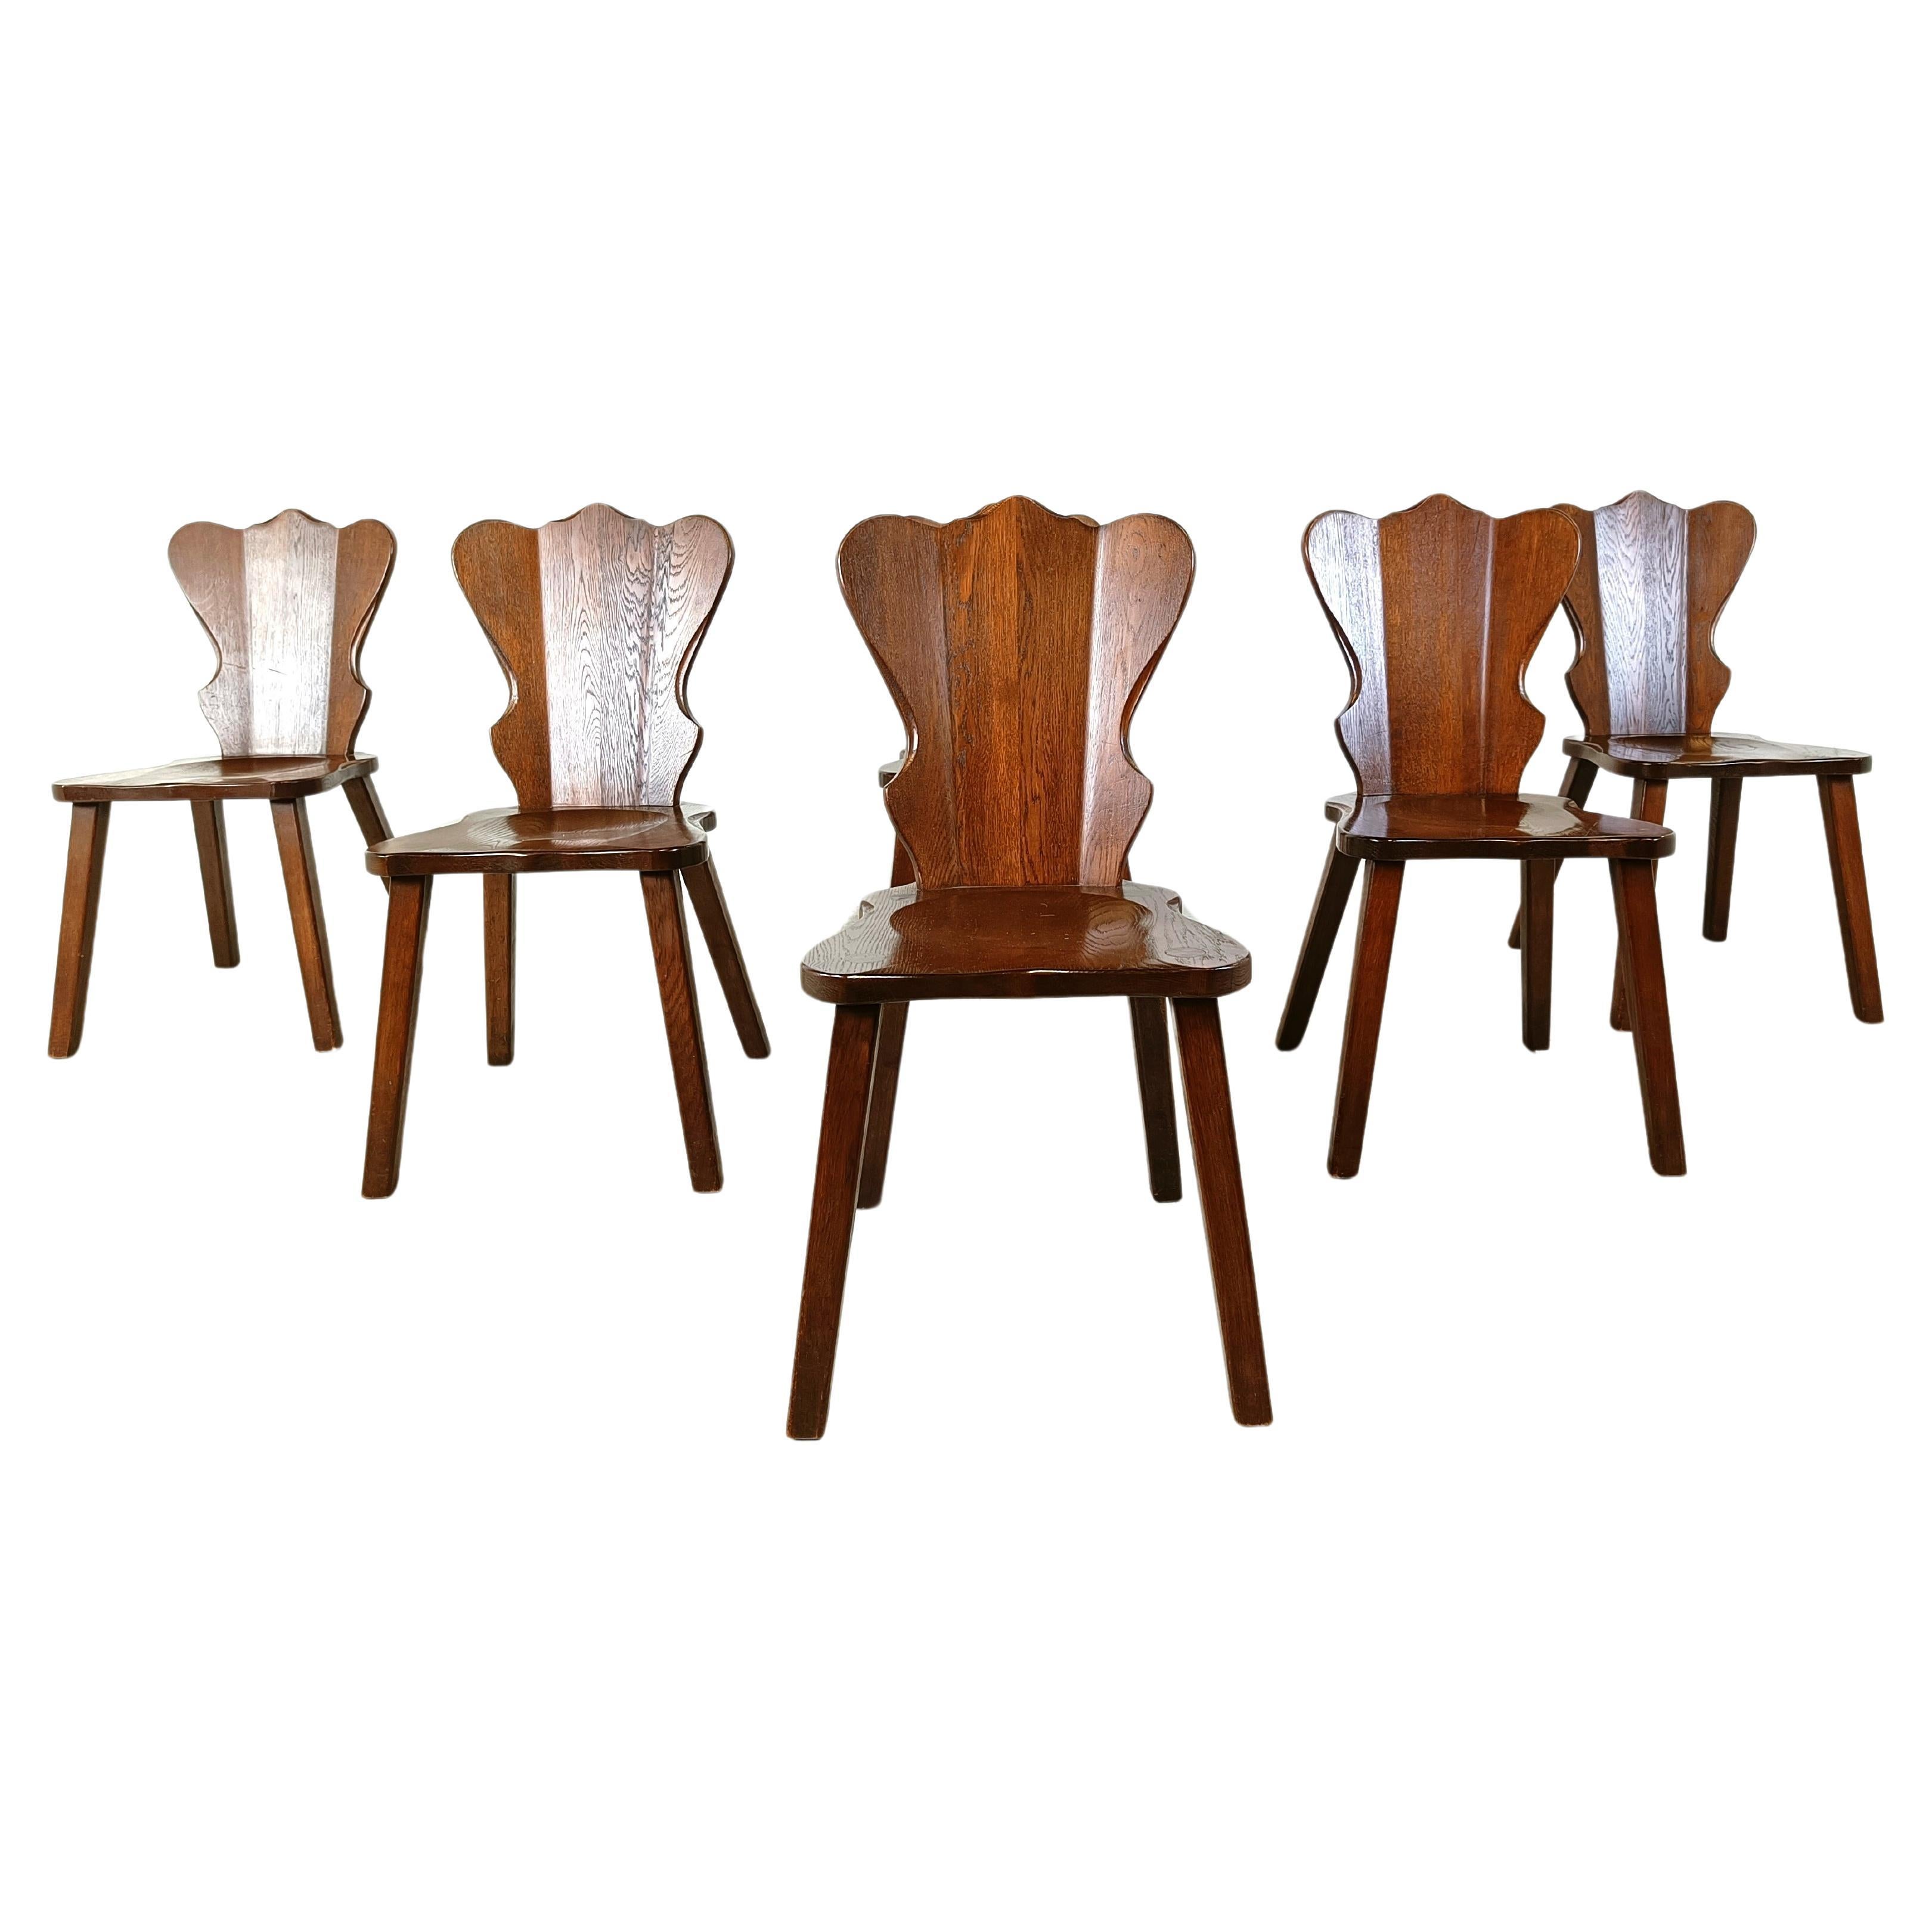 Vintage brutalist dining chairs, set of 6 - 1960s For Sale